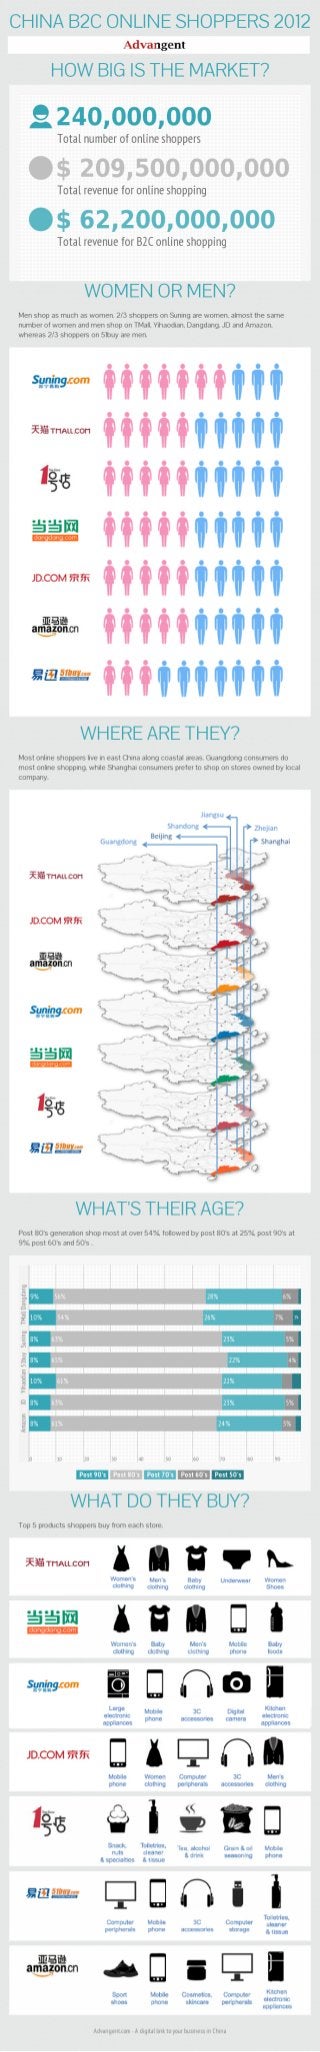 China b2 c online shoppers 2012 new